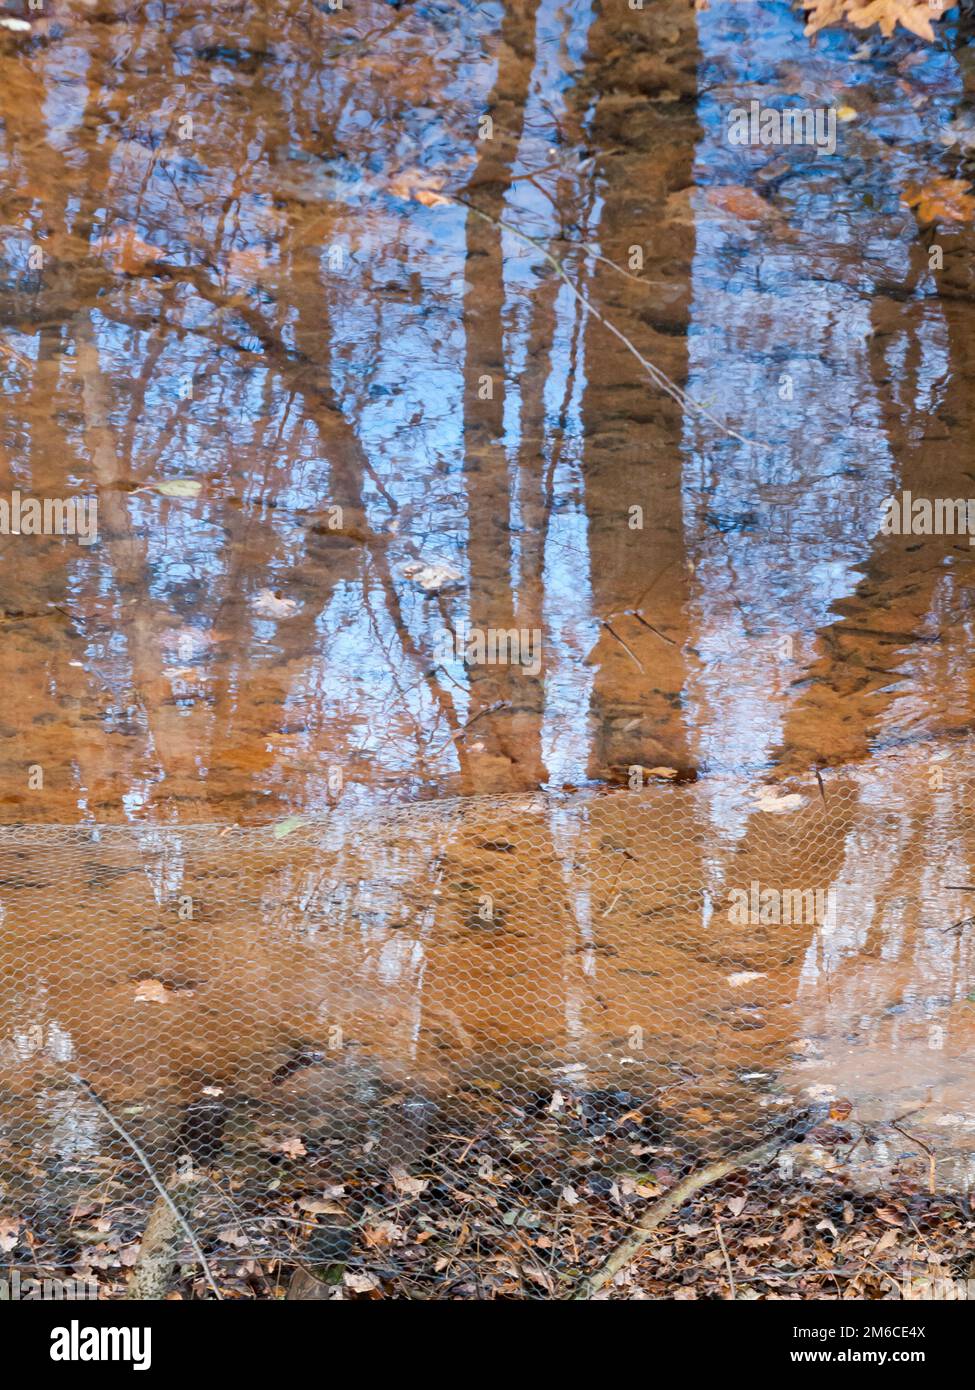 Autumn brown dead leaves near lake surface water dreary reflections Stock Photo